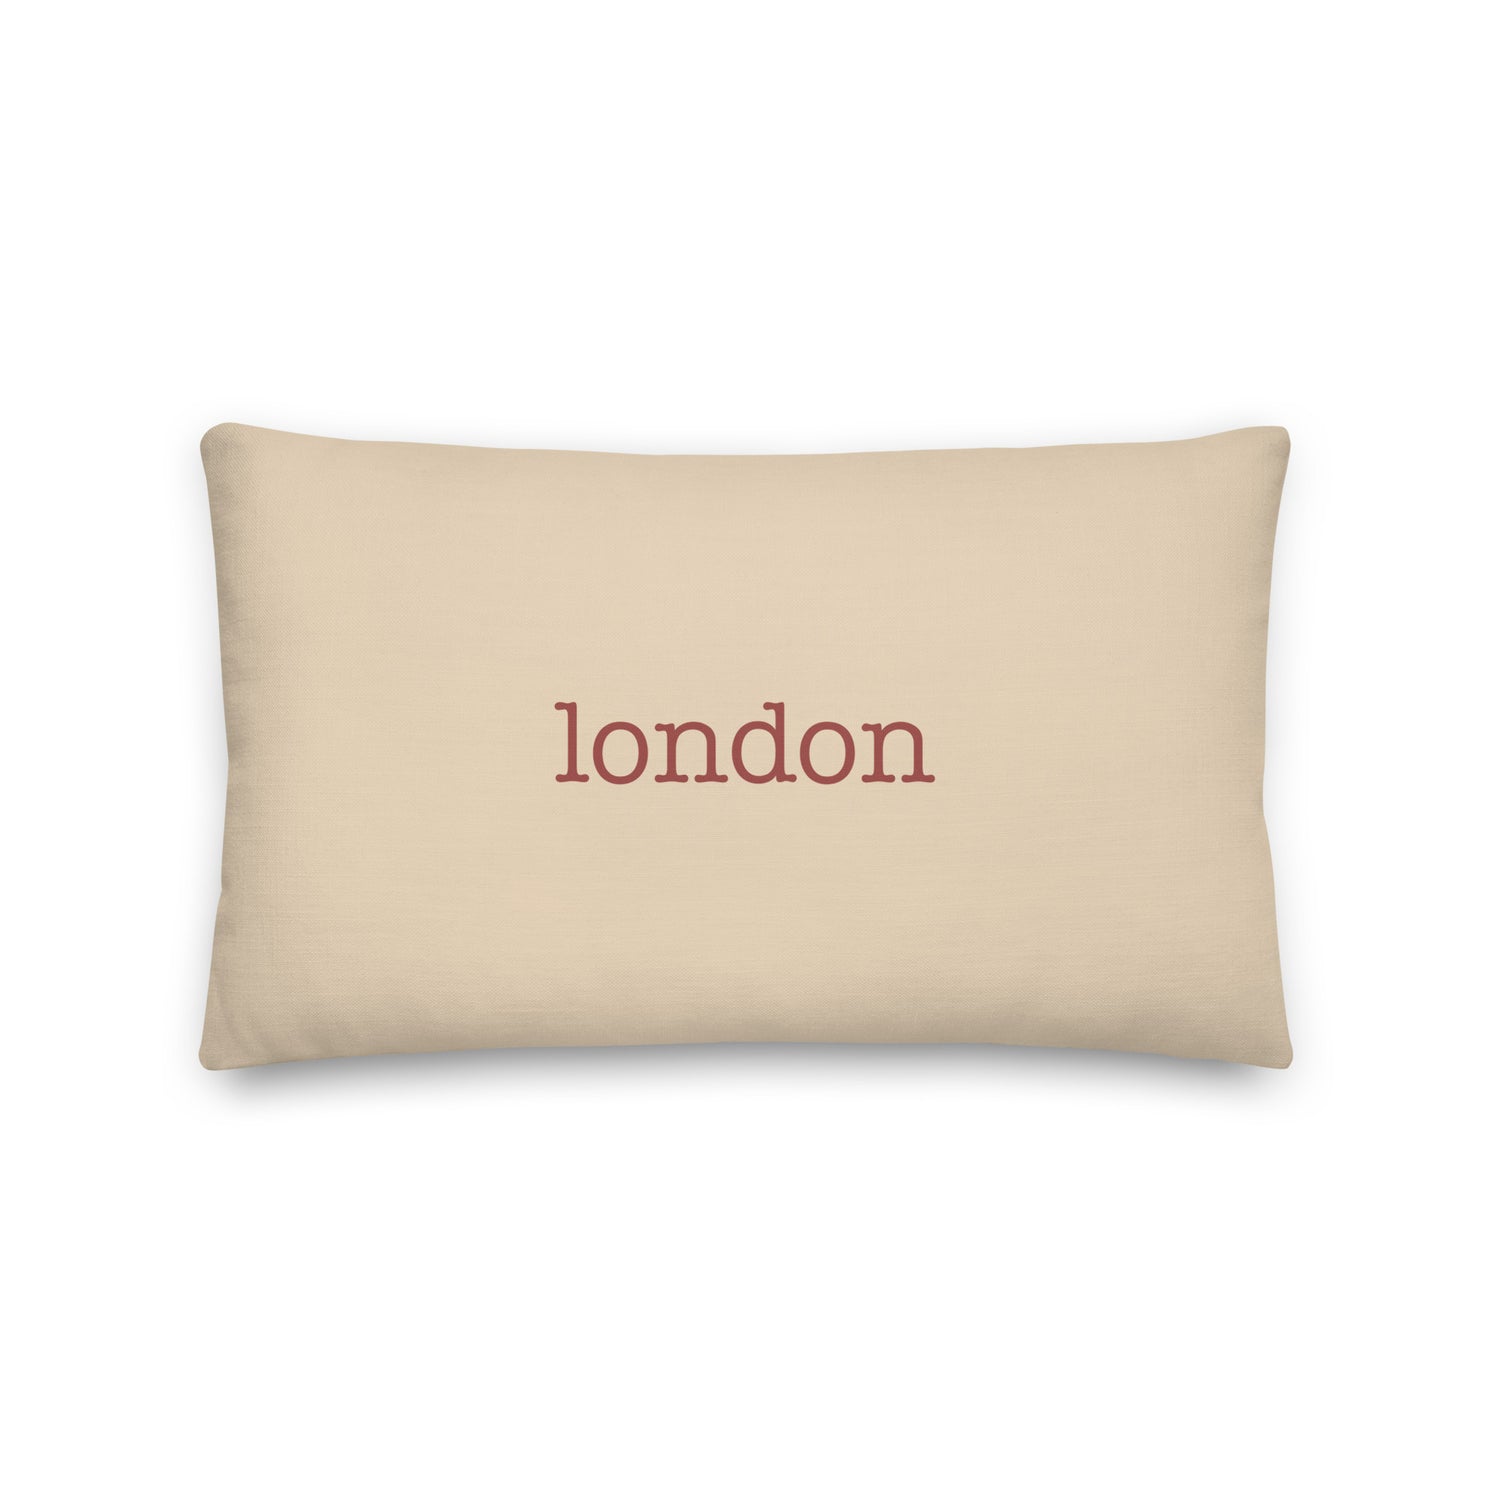 London England Pillows and Blankets • LHR Airport Code